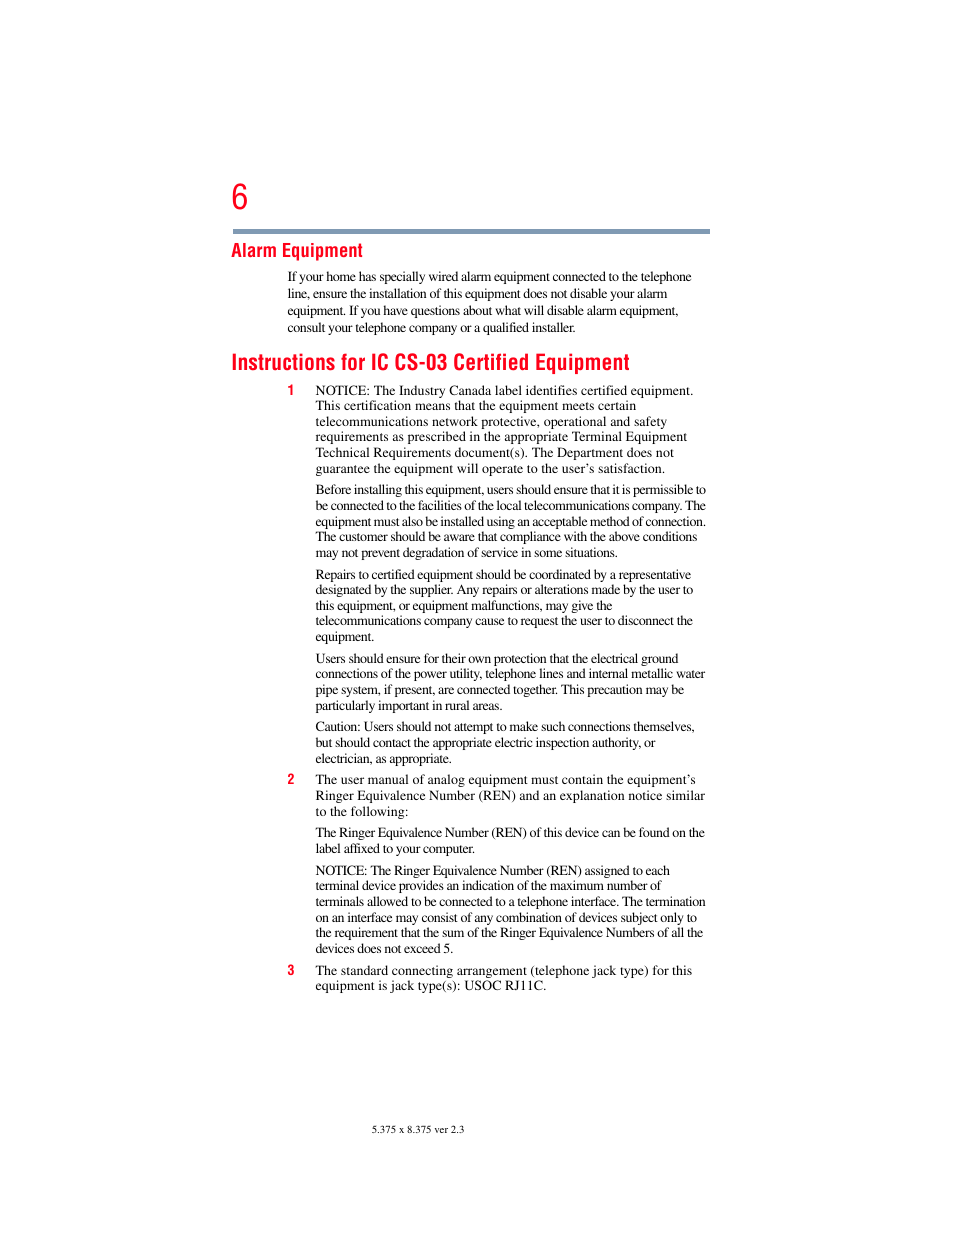 Instructions for ic cs-03 certified equipment | Toshiba SATELLITE M300 User Manual | Page 6 / 232